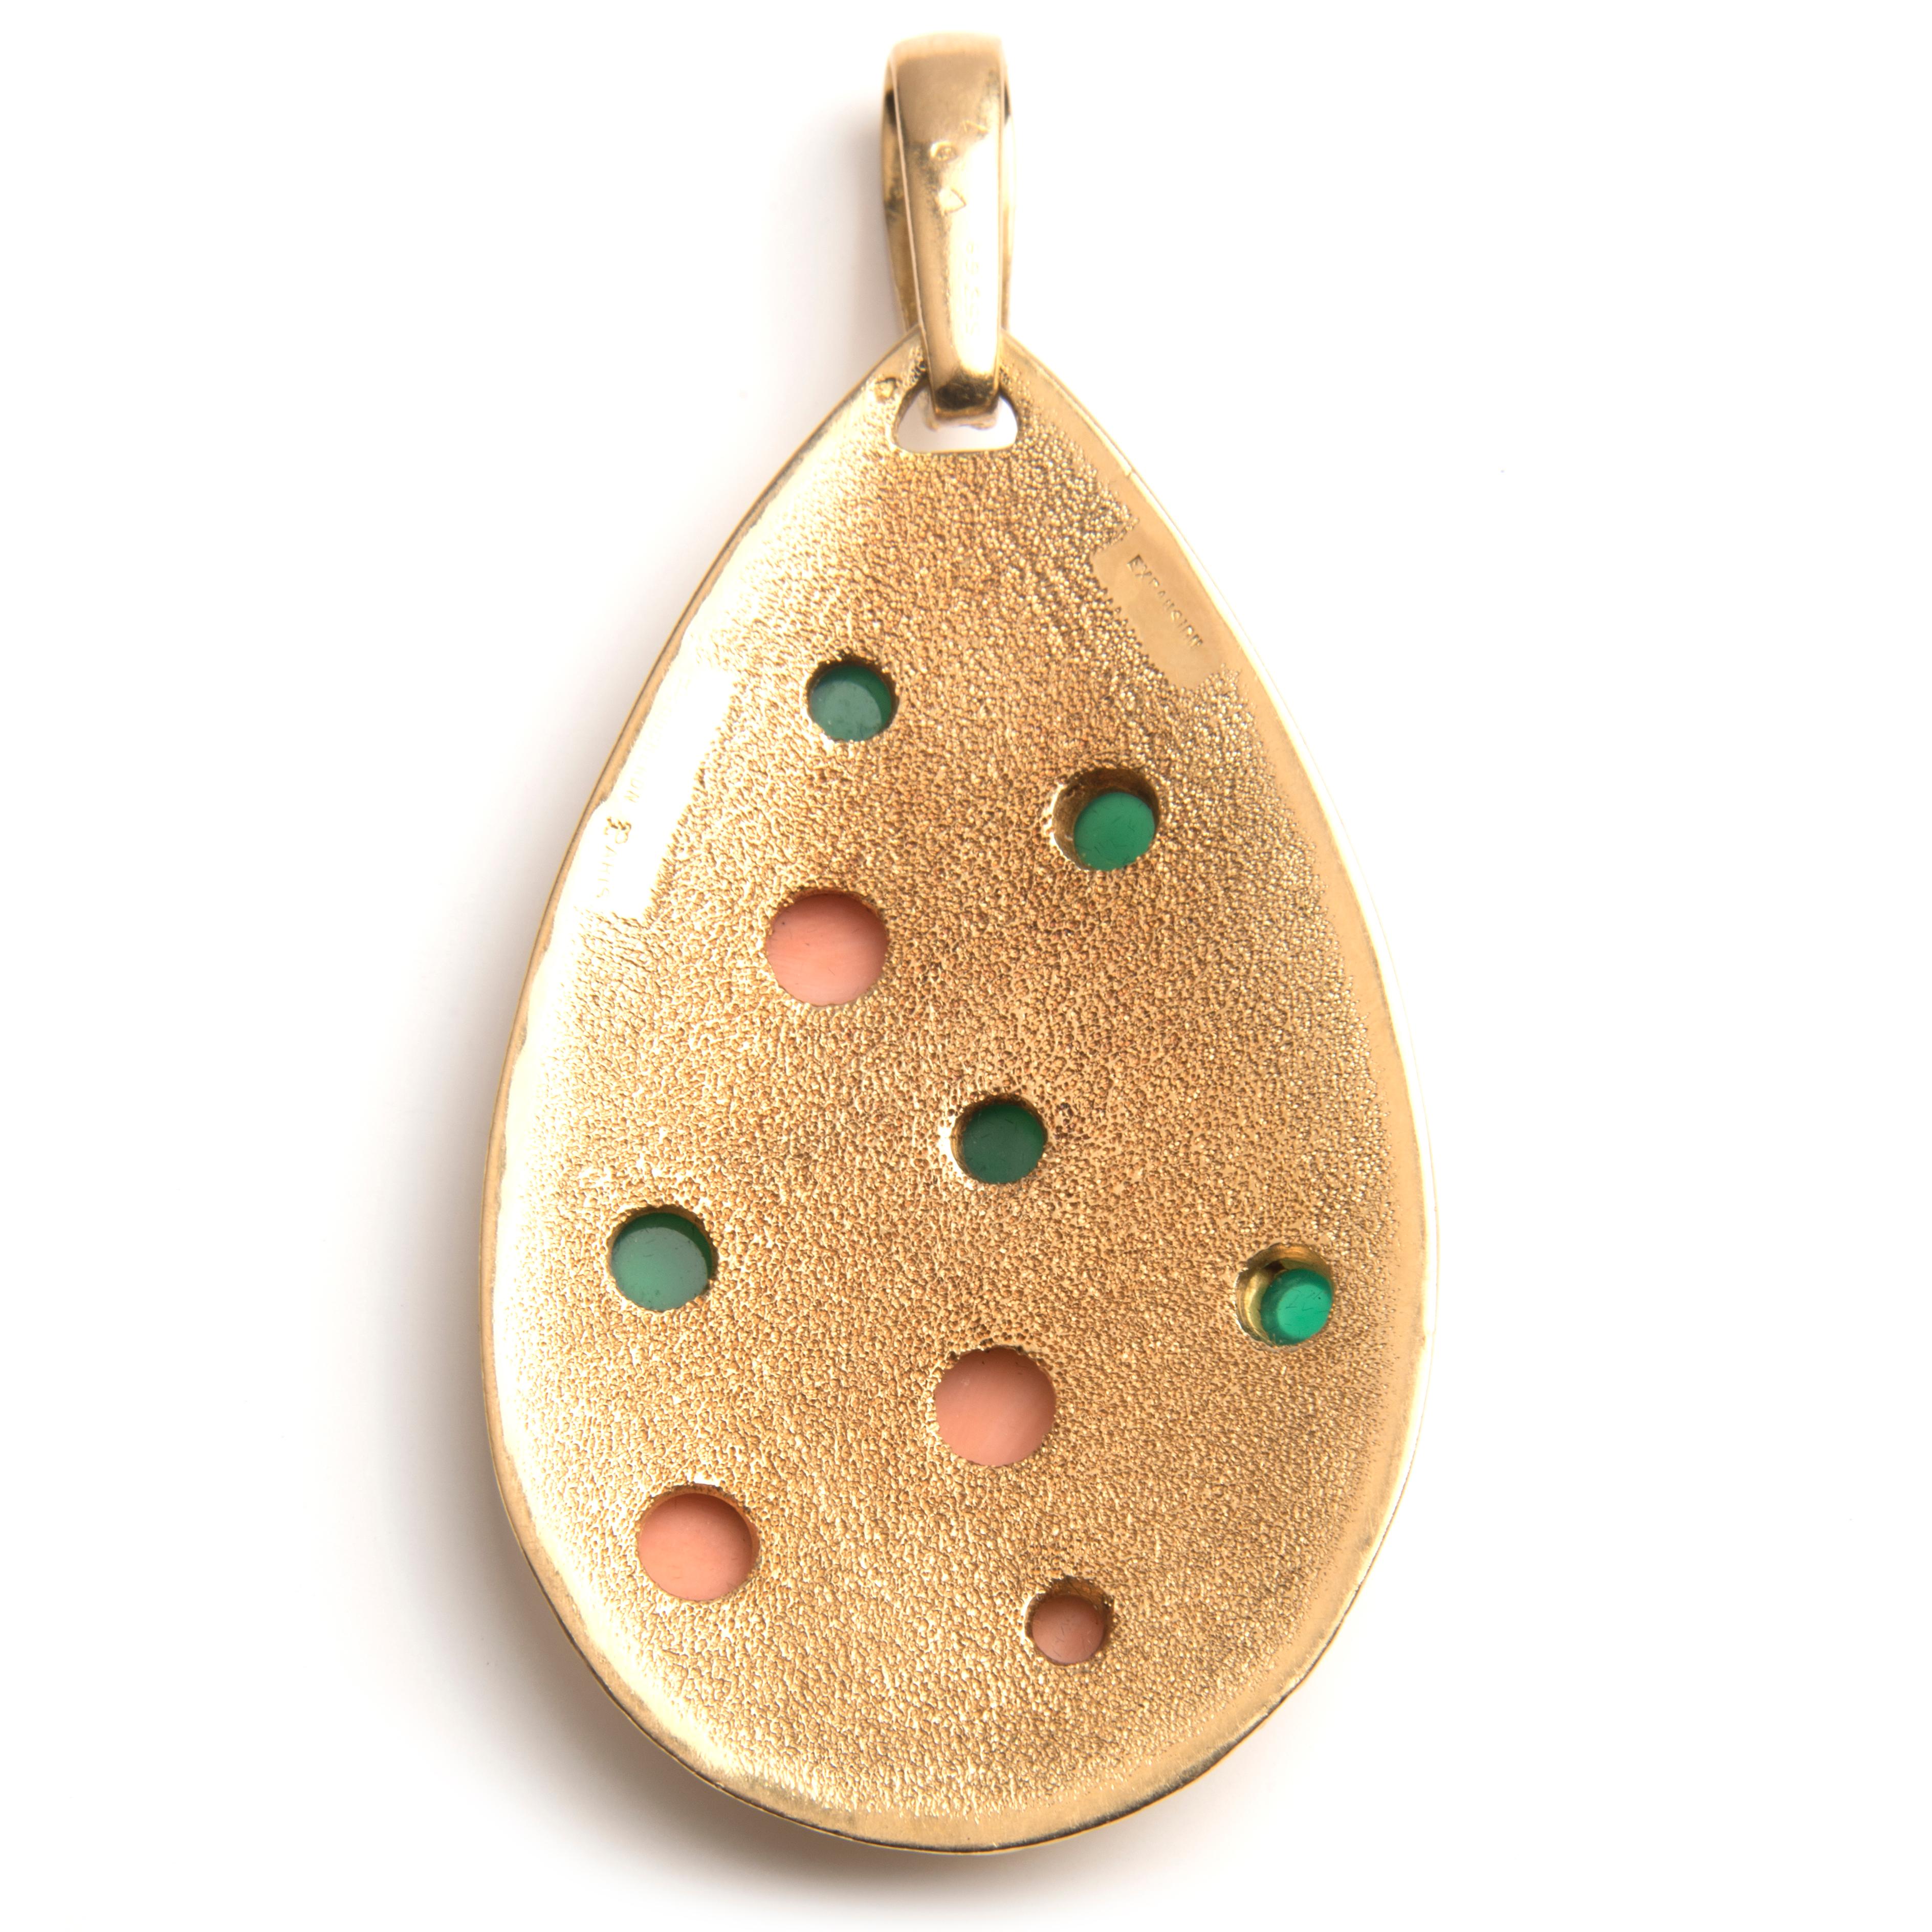 Boucheron pendant from the Expansion collection, in the shape of a drop, the textured 18k gold designed to represent the surface of the moon, set with five cabochons of pink coral and four cabochons of chrysoprase
Signed Boucheron Paris, marked